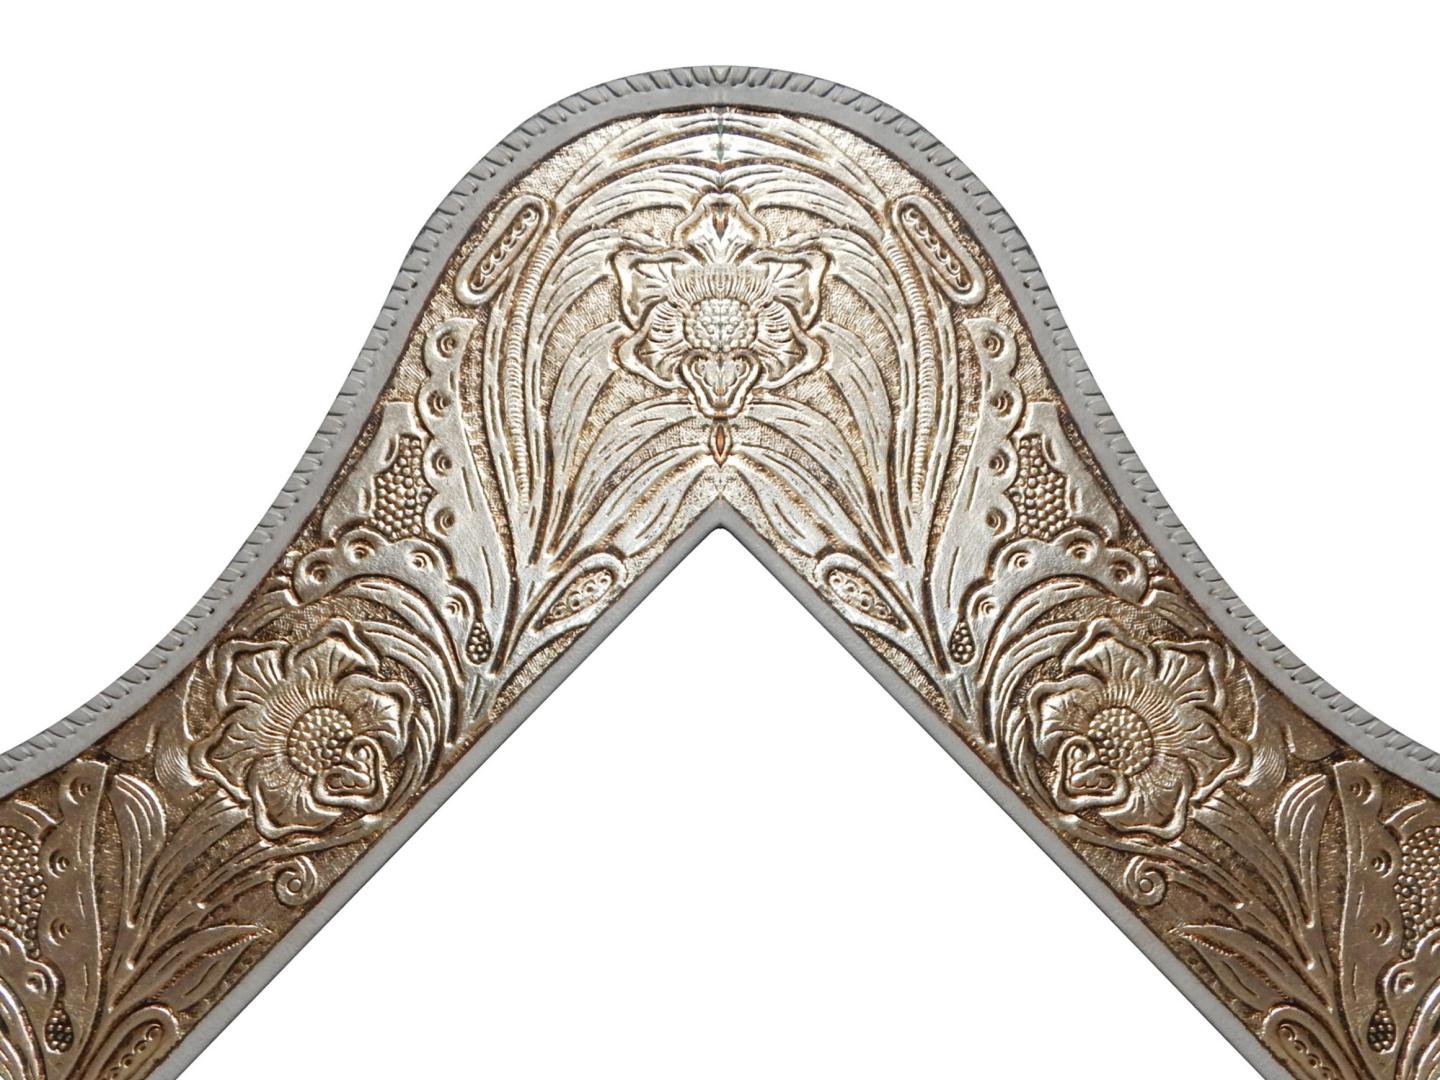 leather frames western hand tooled/tooling floral design with Serpentine shape, hand stitch edge lacing